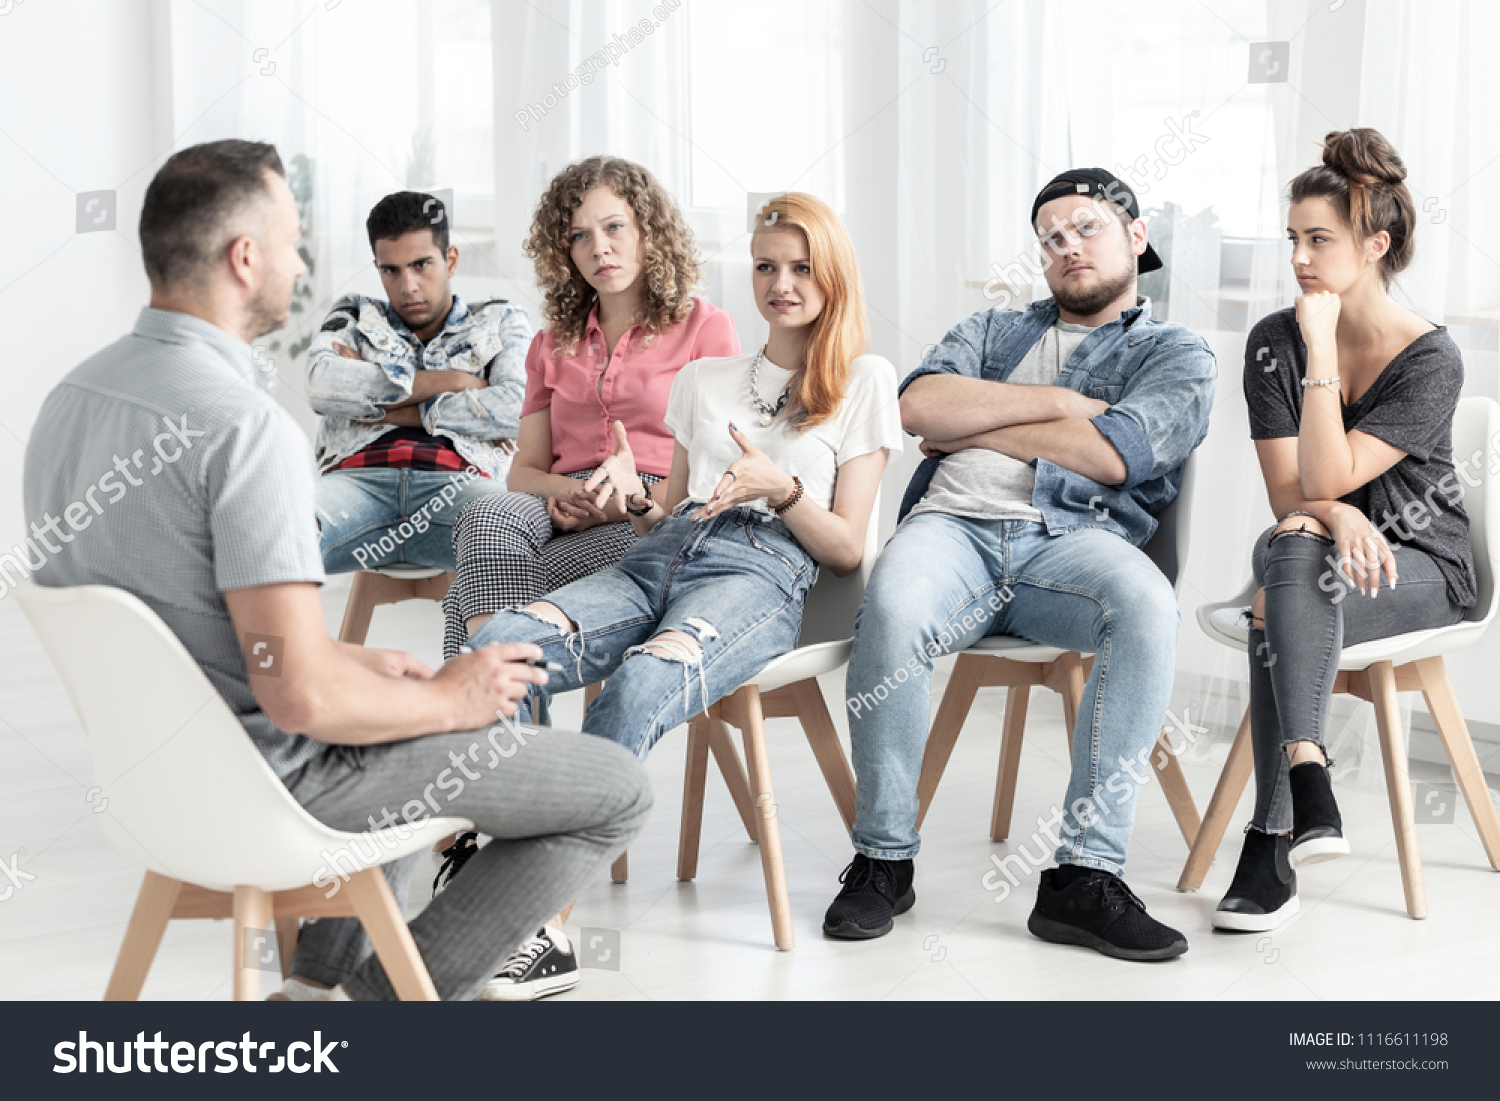 Group of rebellious teenagers talking to a psychotherapist about bullying in their school #1116611198